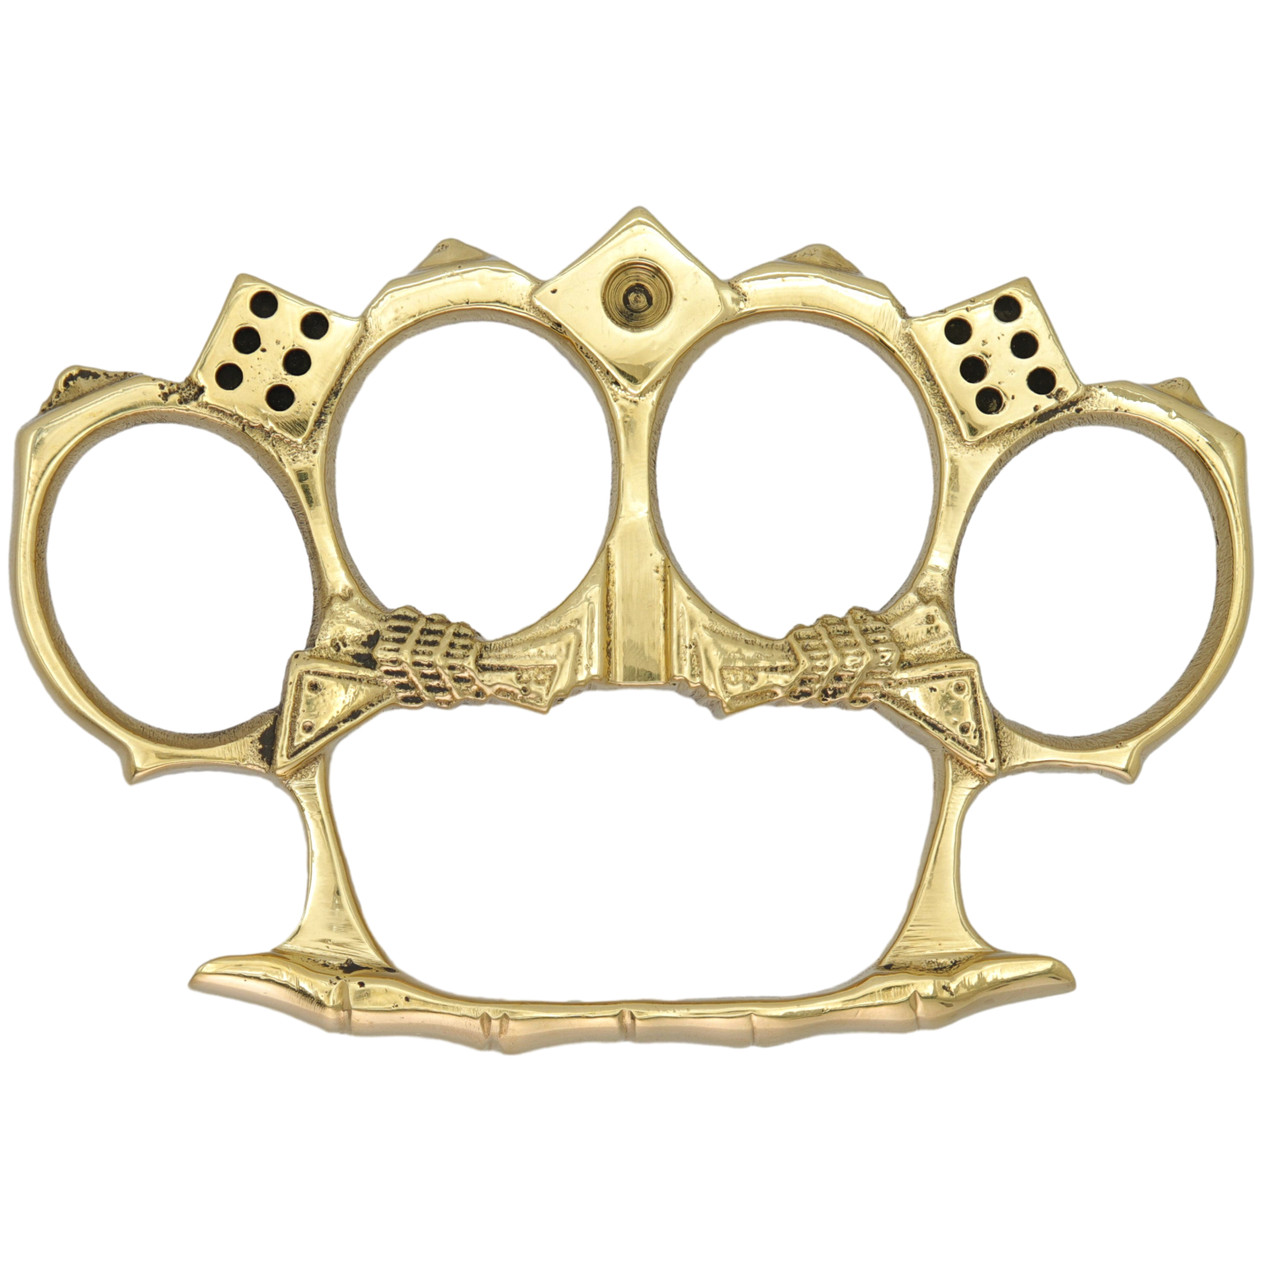 What are The Possible Damages to Brass Knuckles?